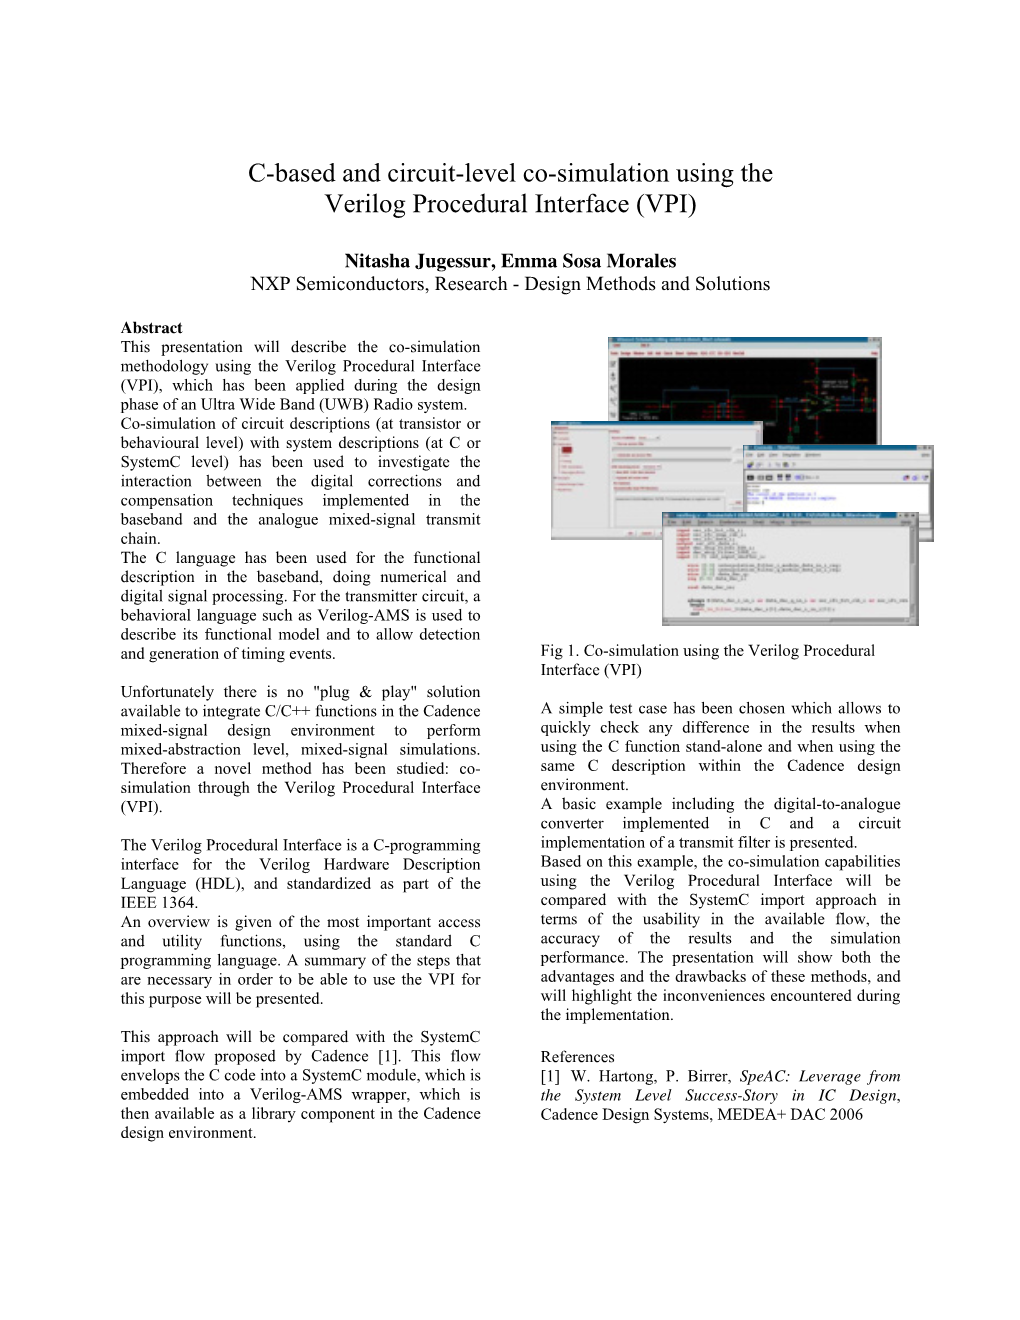 C-Based and Circuit-Level Co-Simulation Using the Verilog Procedural Interface (VPI)